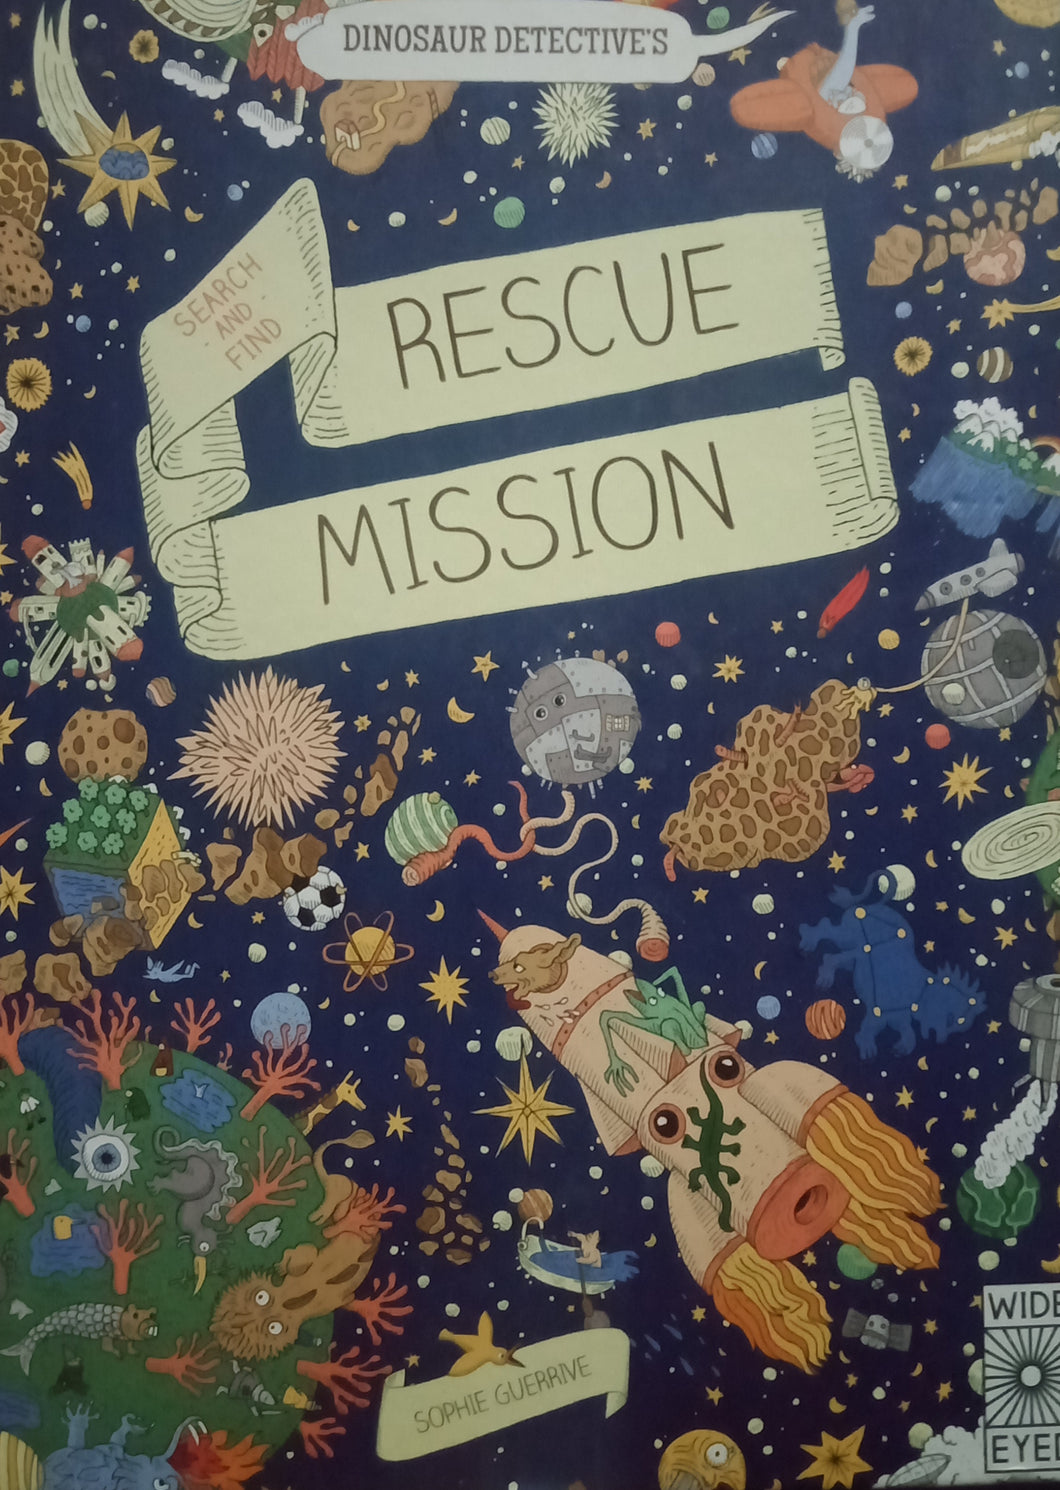 Rescue Mission by Sophie Guerrive